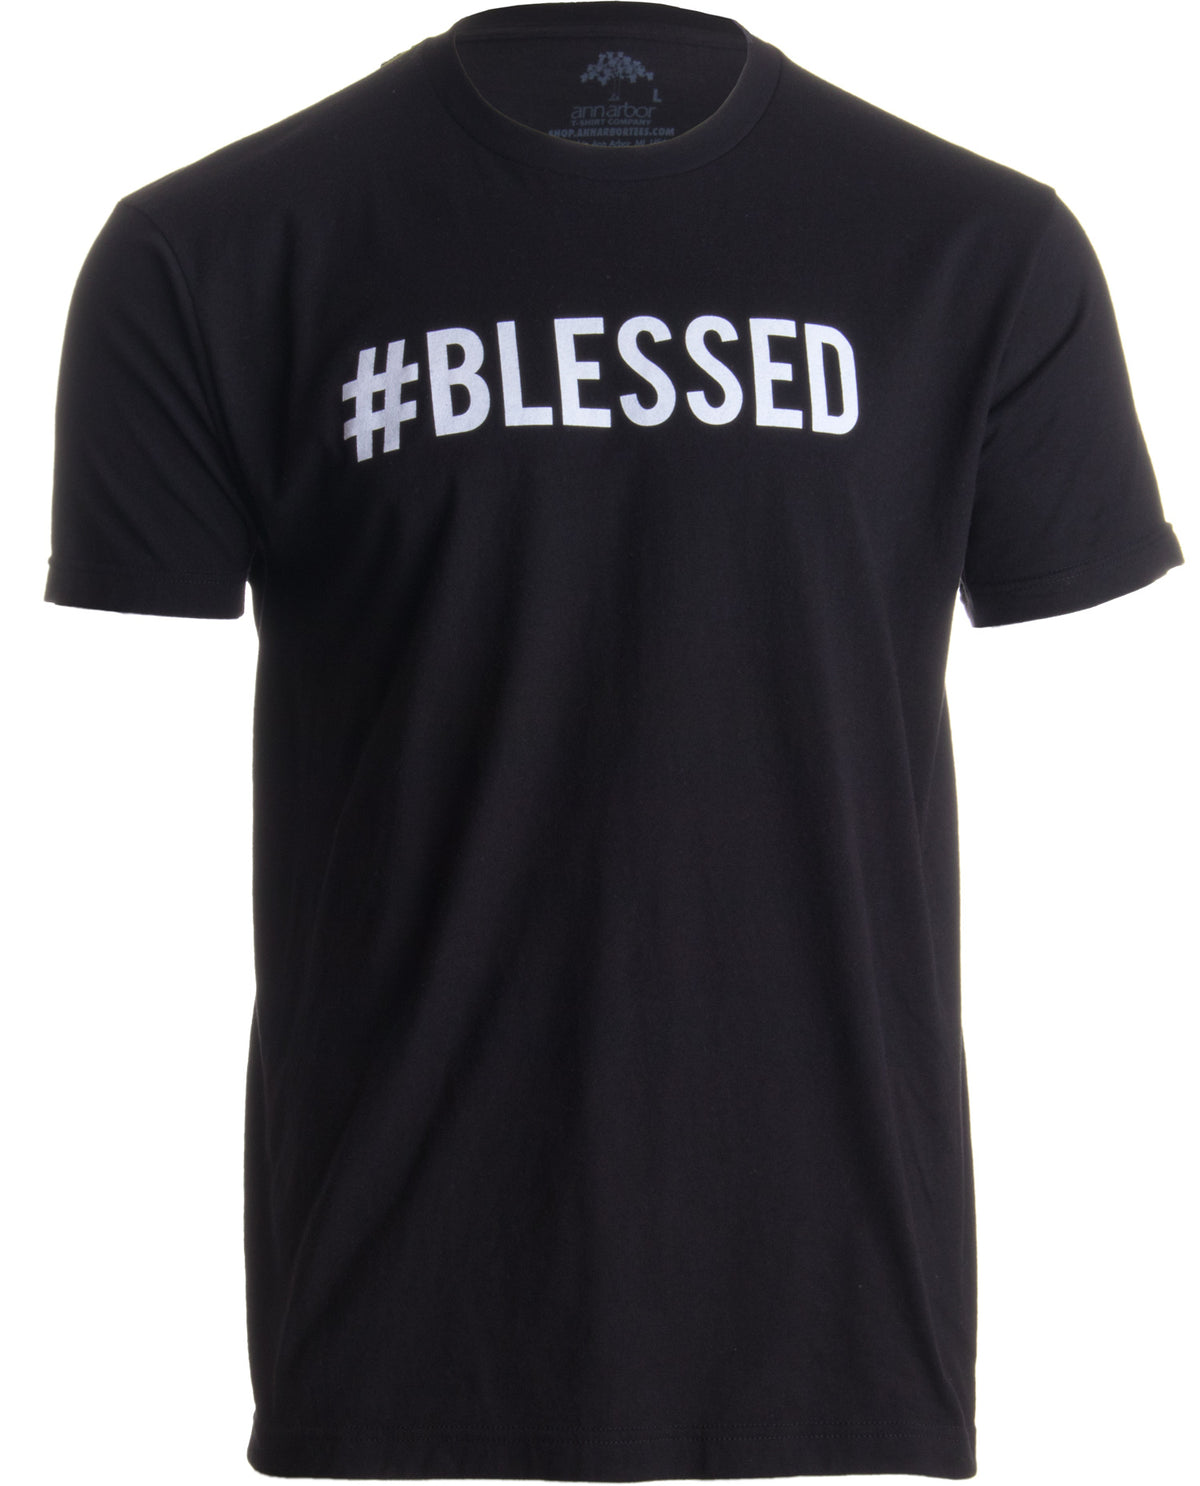 #BLESSED | Christian Humor, Humble Hash Tag Twitter Good Life Unisex T-shirt